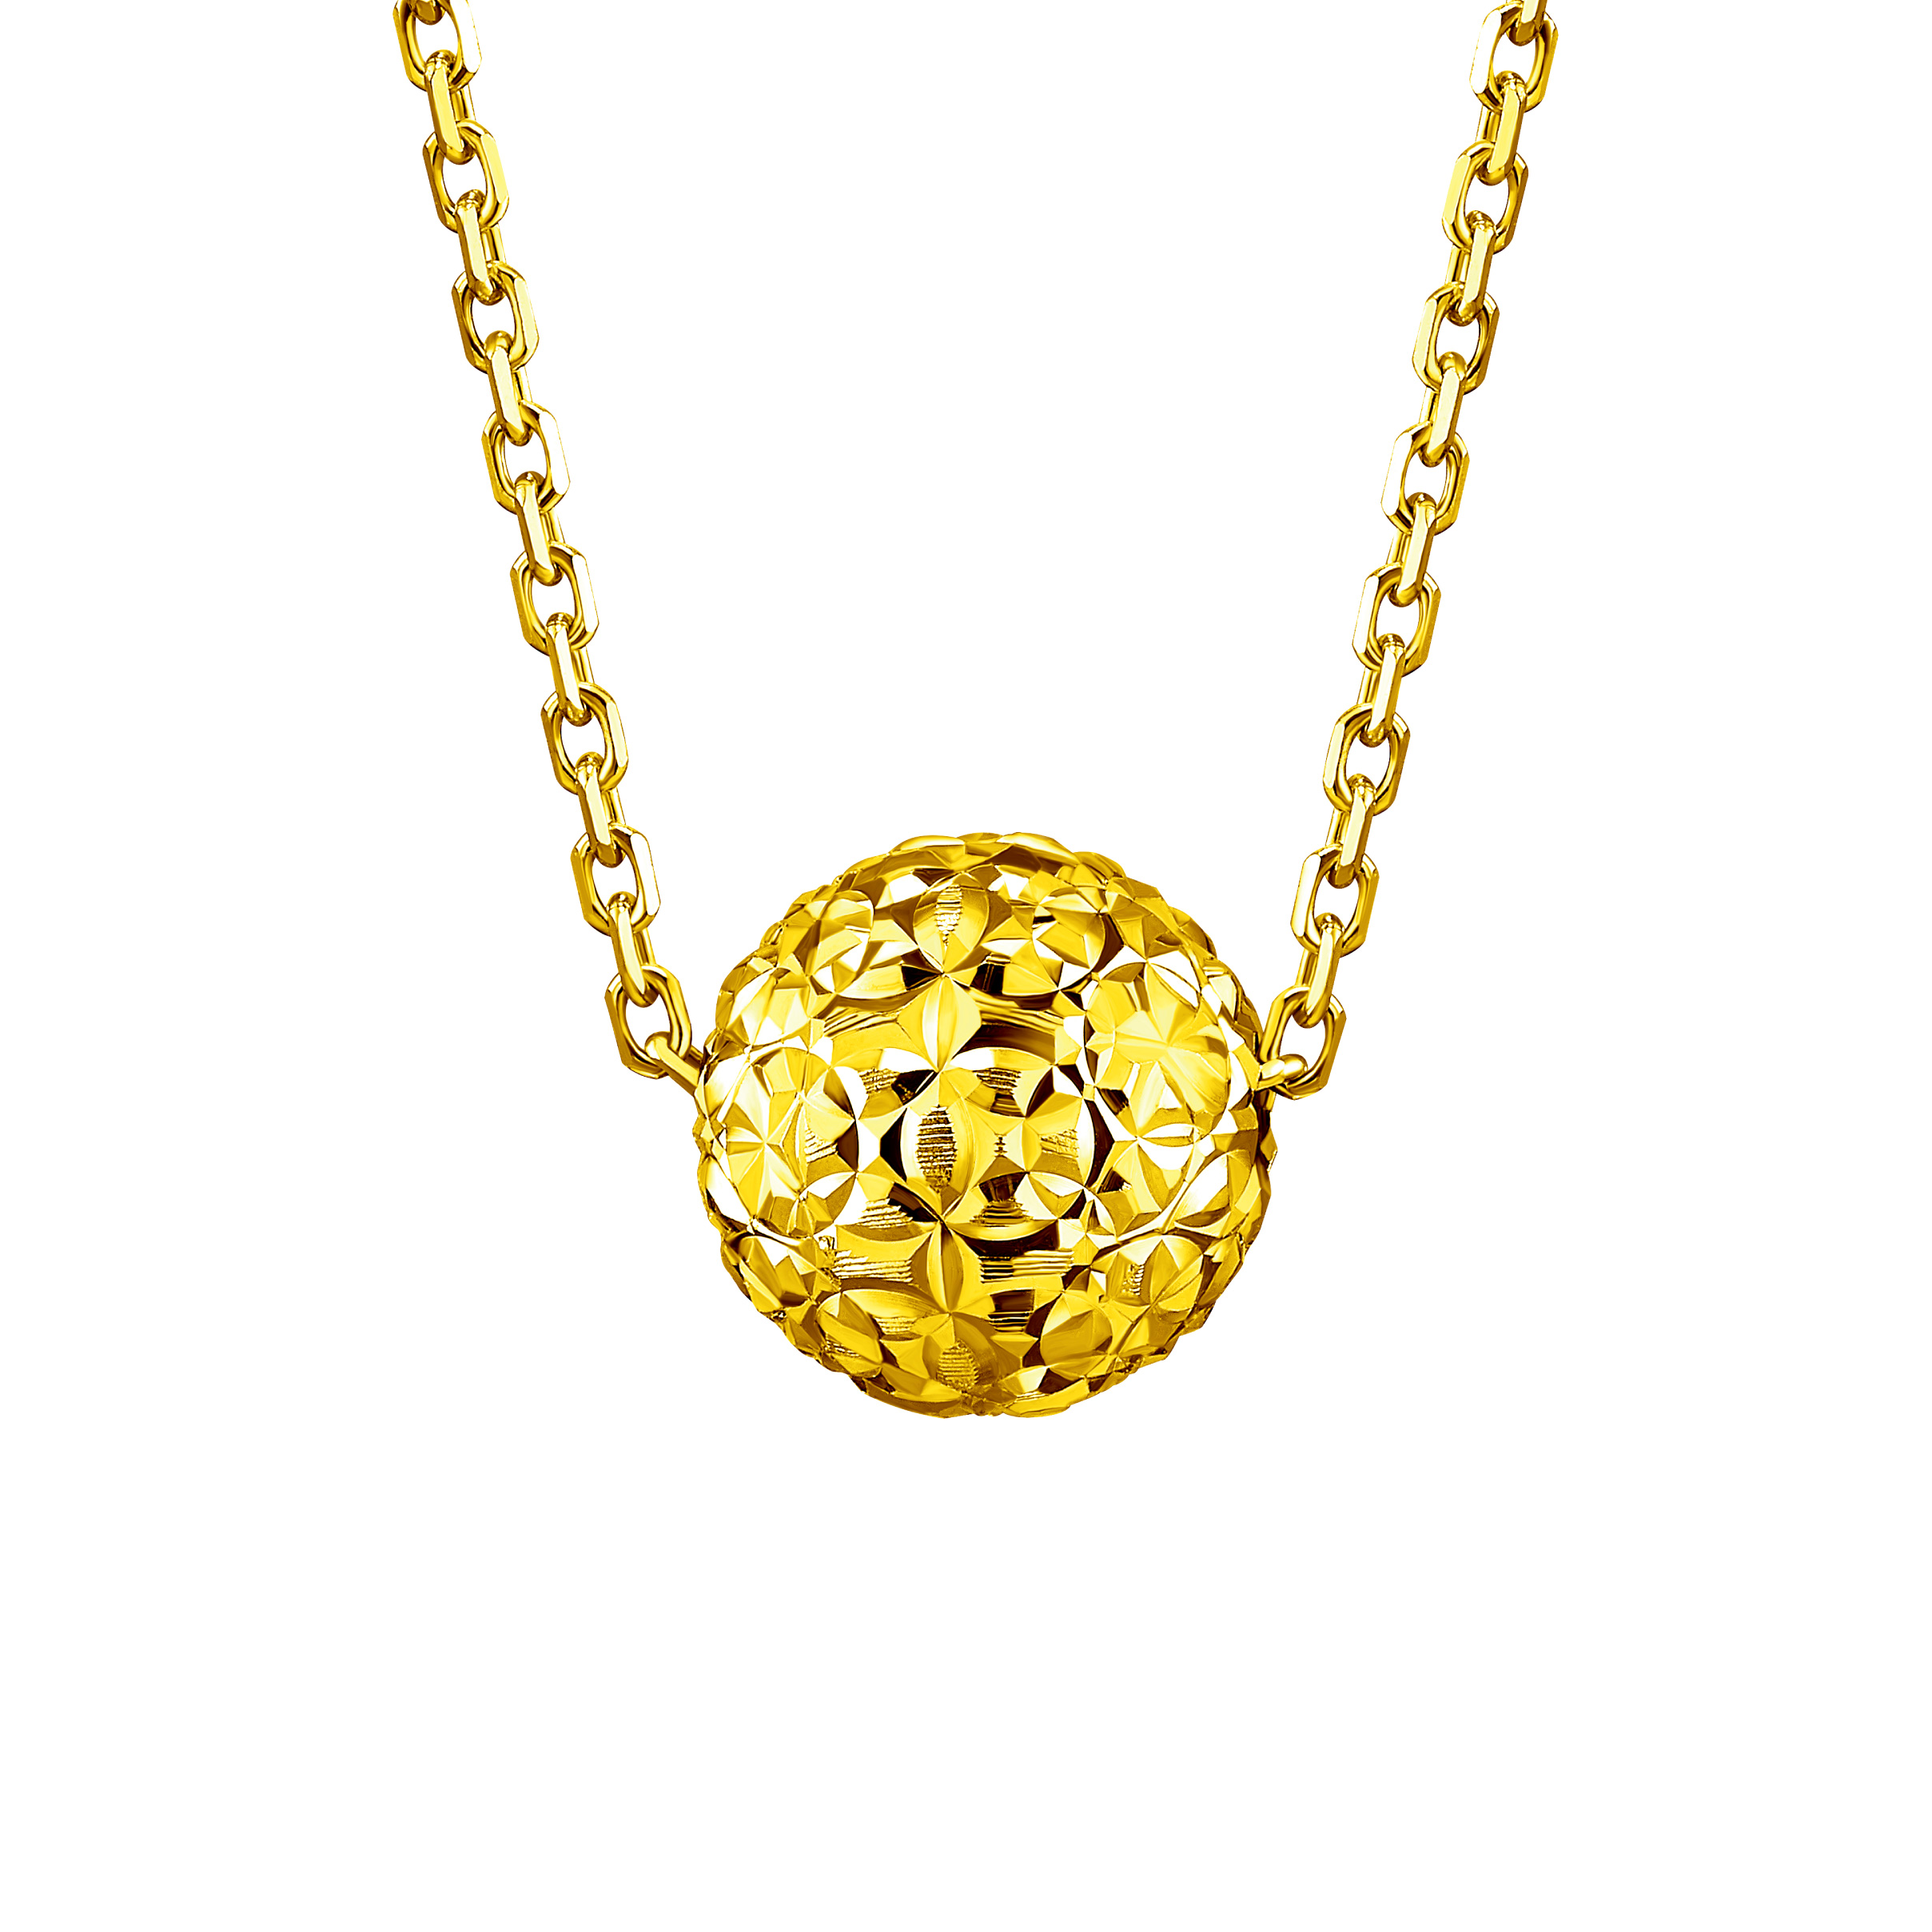 Goldstyle "Therapeutic Planet" Gold Necklace